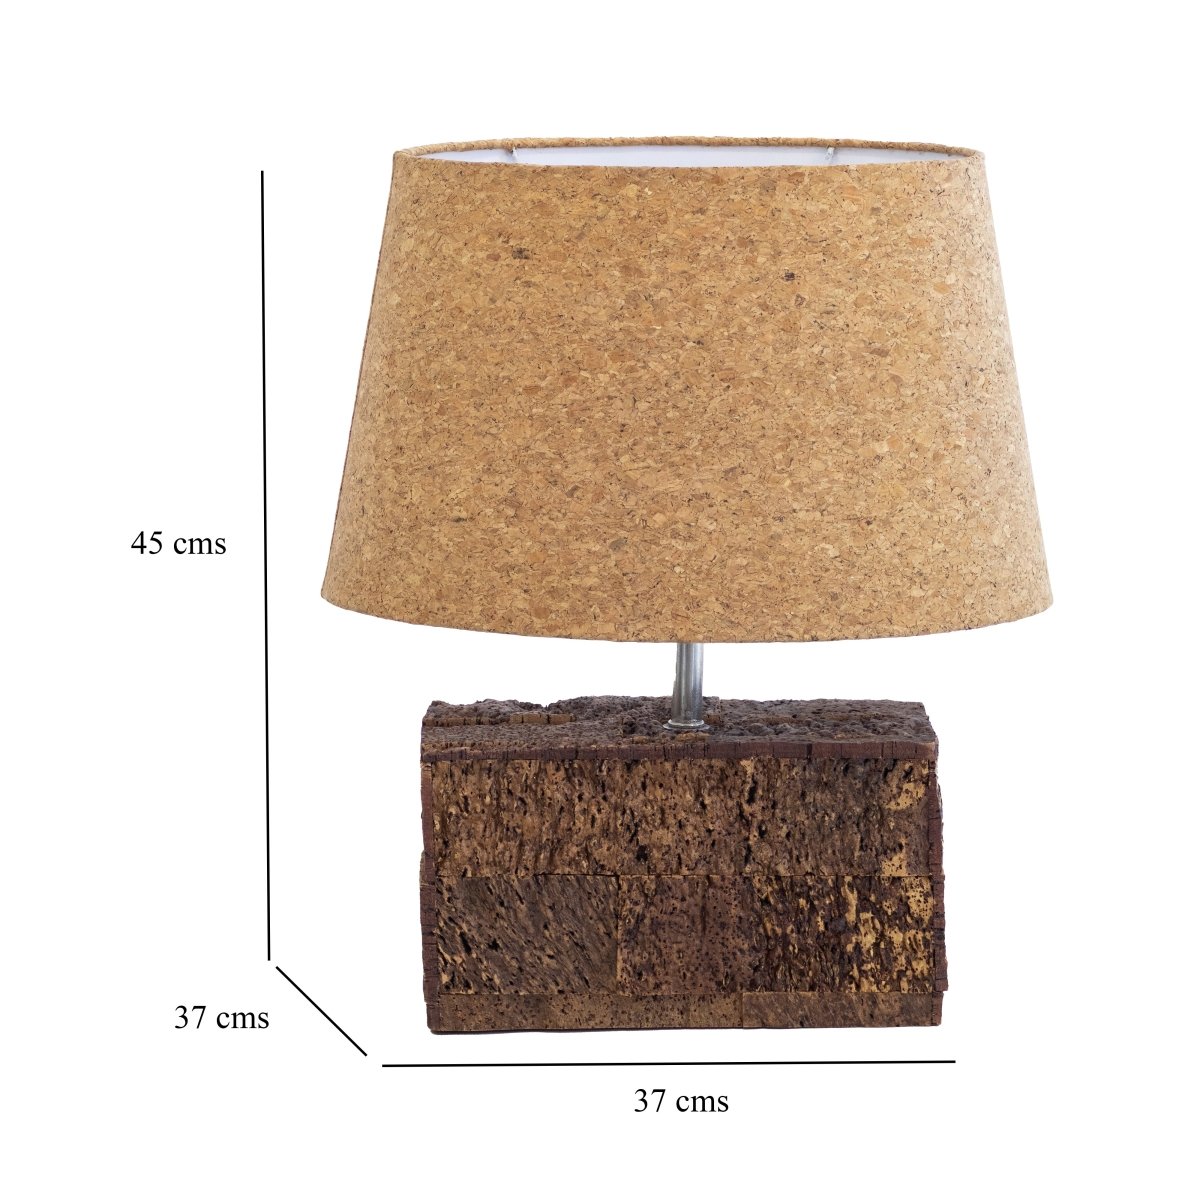 Kezevel Cork Decorative Table Lamp - Brown Conical Shade with Rectangle Base Bedside Table Lamp, Desk Lamp, Side Lamp